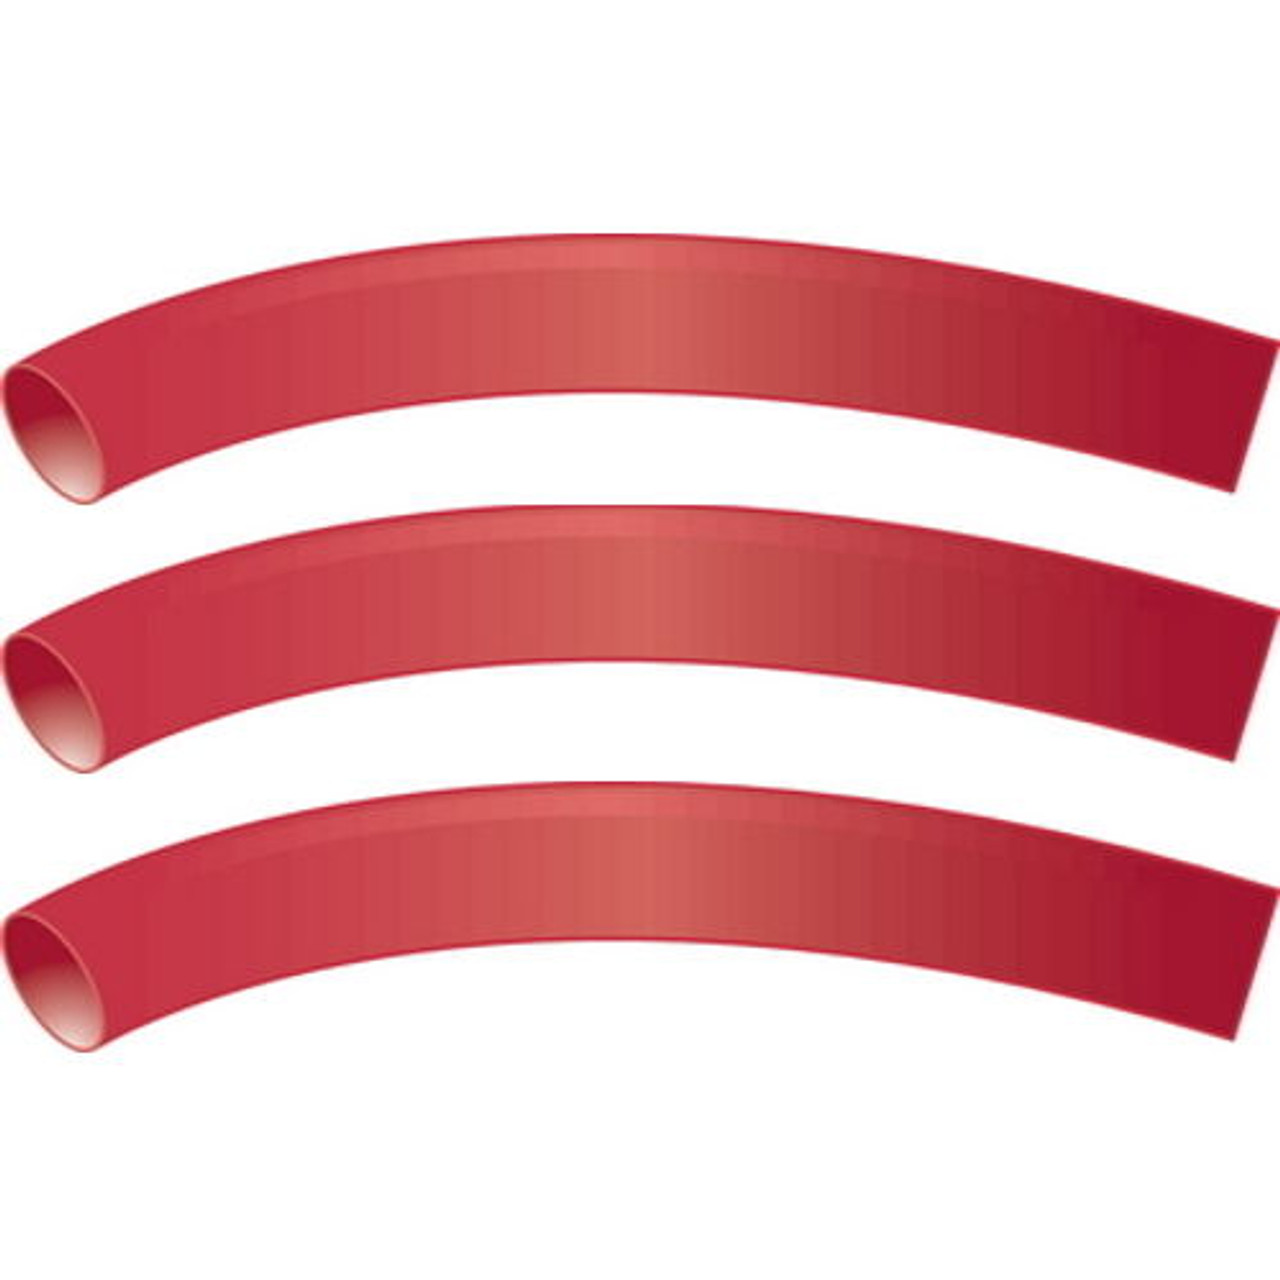 3 Pack of Red 1/8 Inch x 3 Inch 3:1 Heat Shrink Tubing with Sealant for Boats